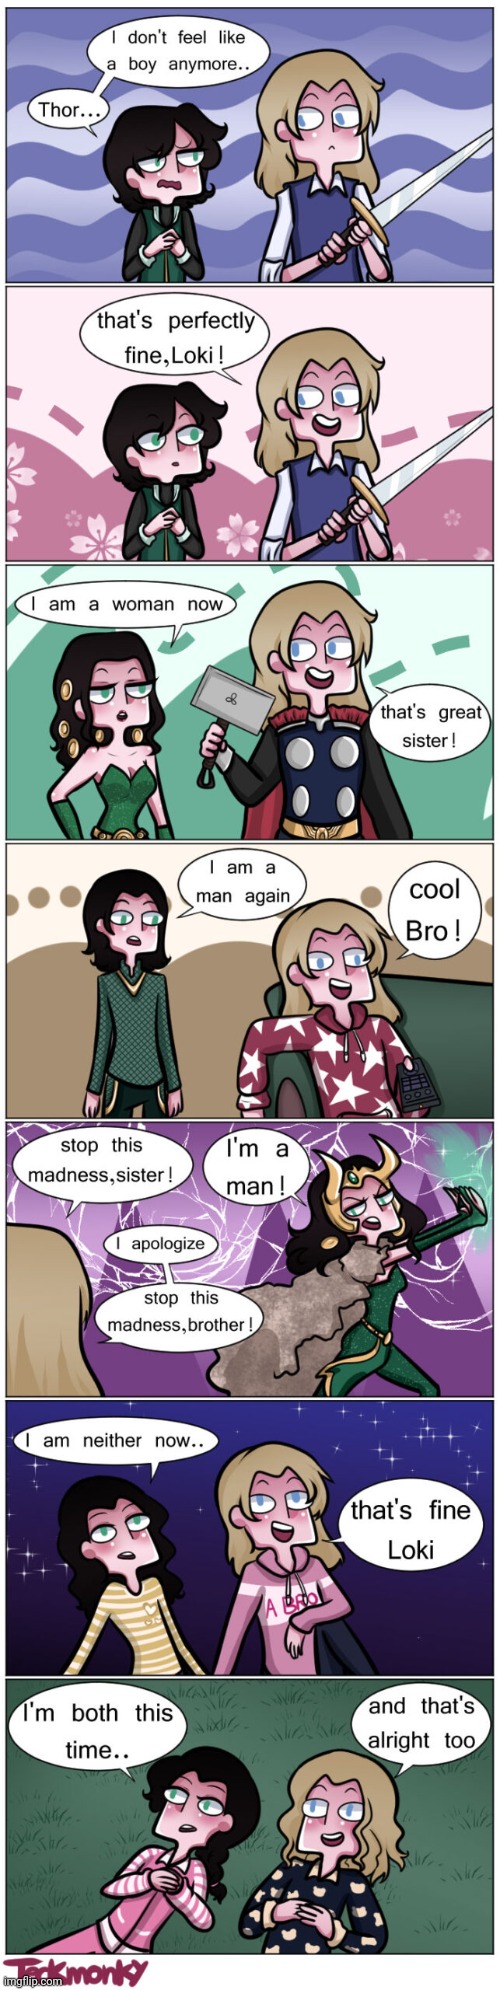 Loki has given birth to many children. | image tagged in comics/cartoons,gender fluid,mythology,lgbt,european | made w/ Imgflip meme maker